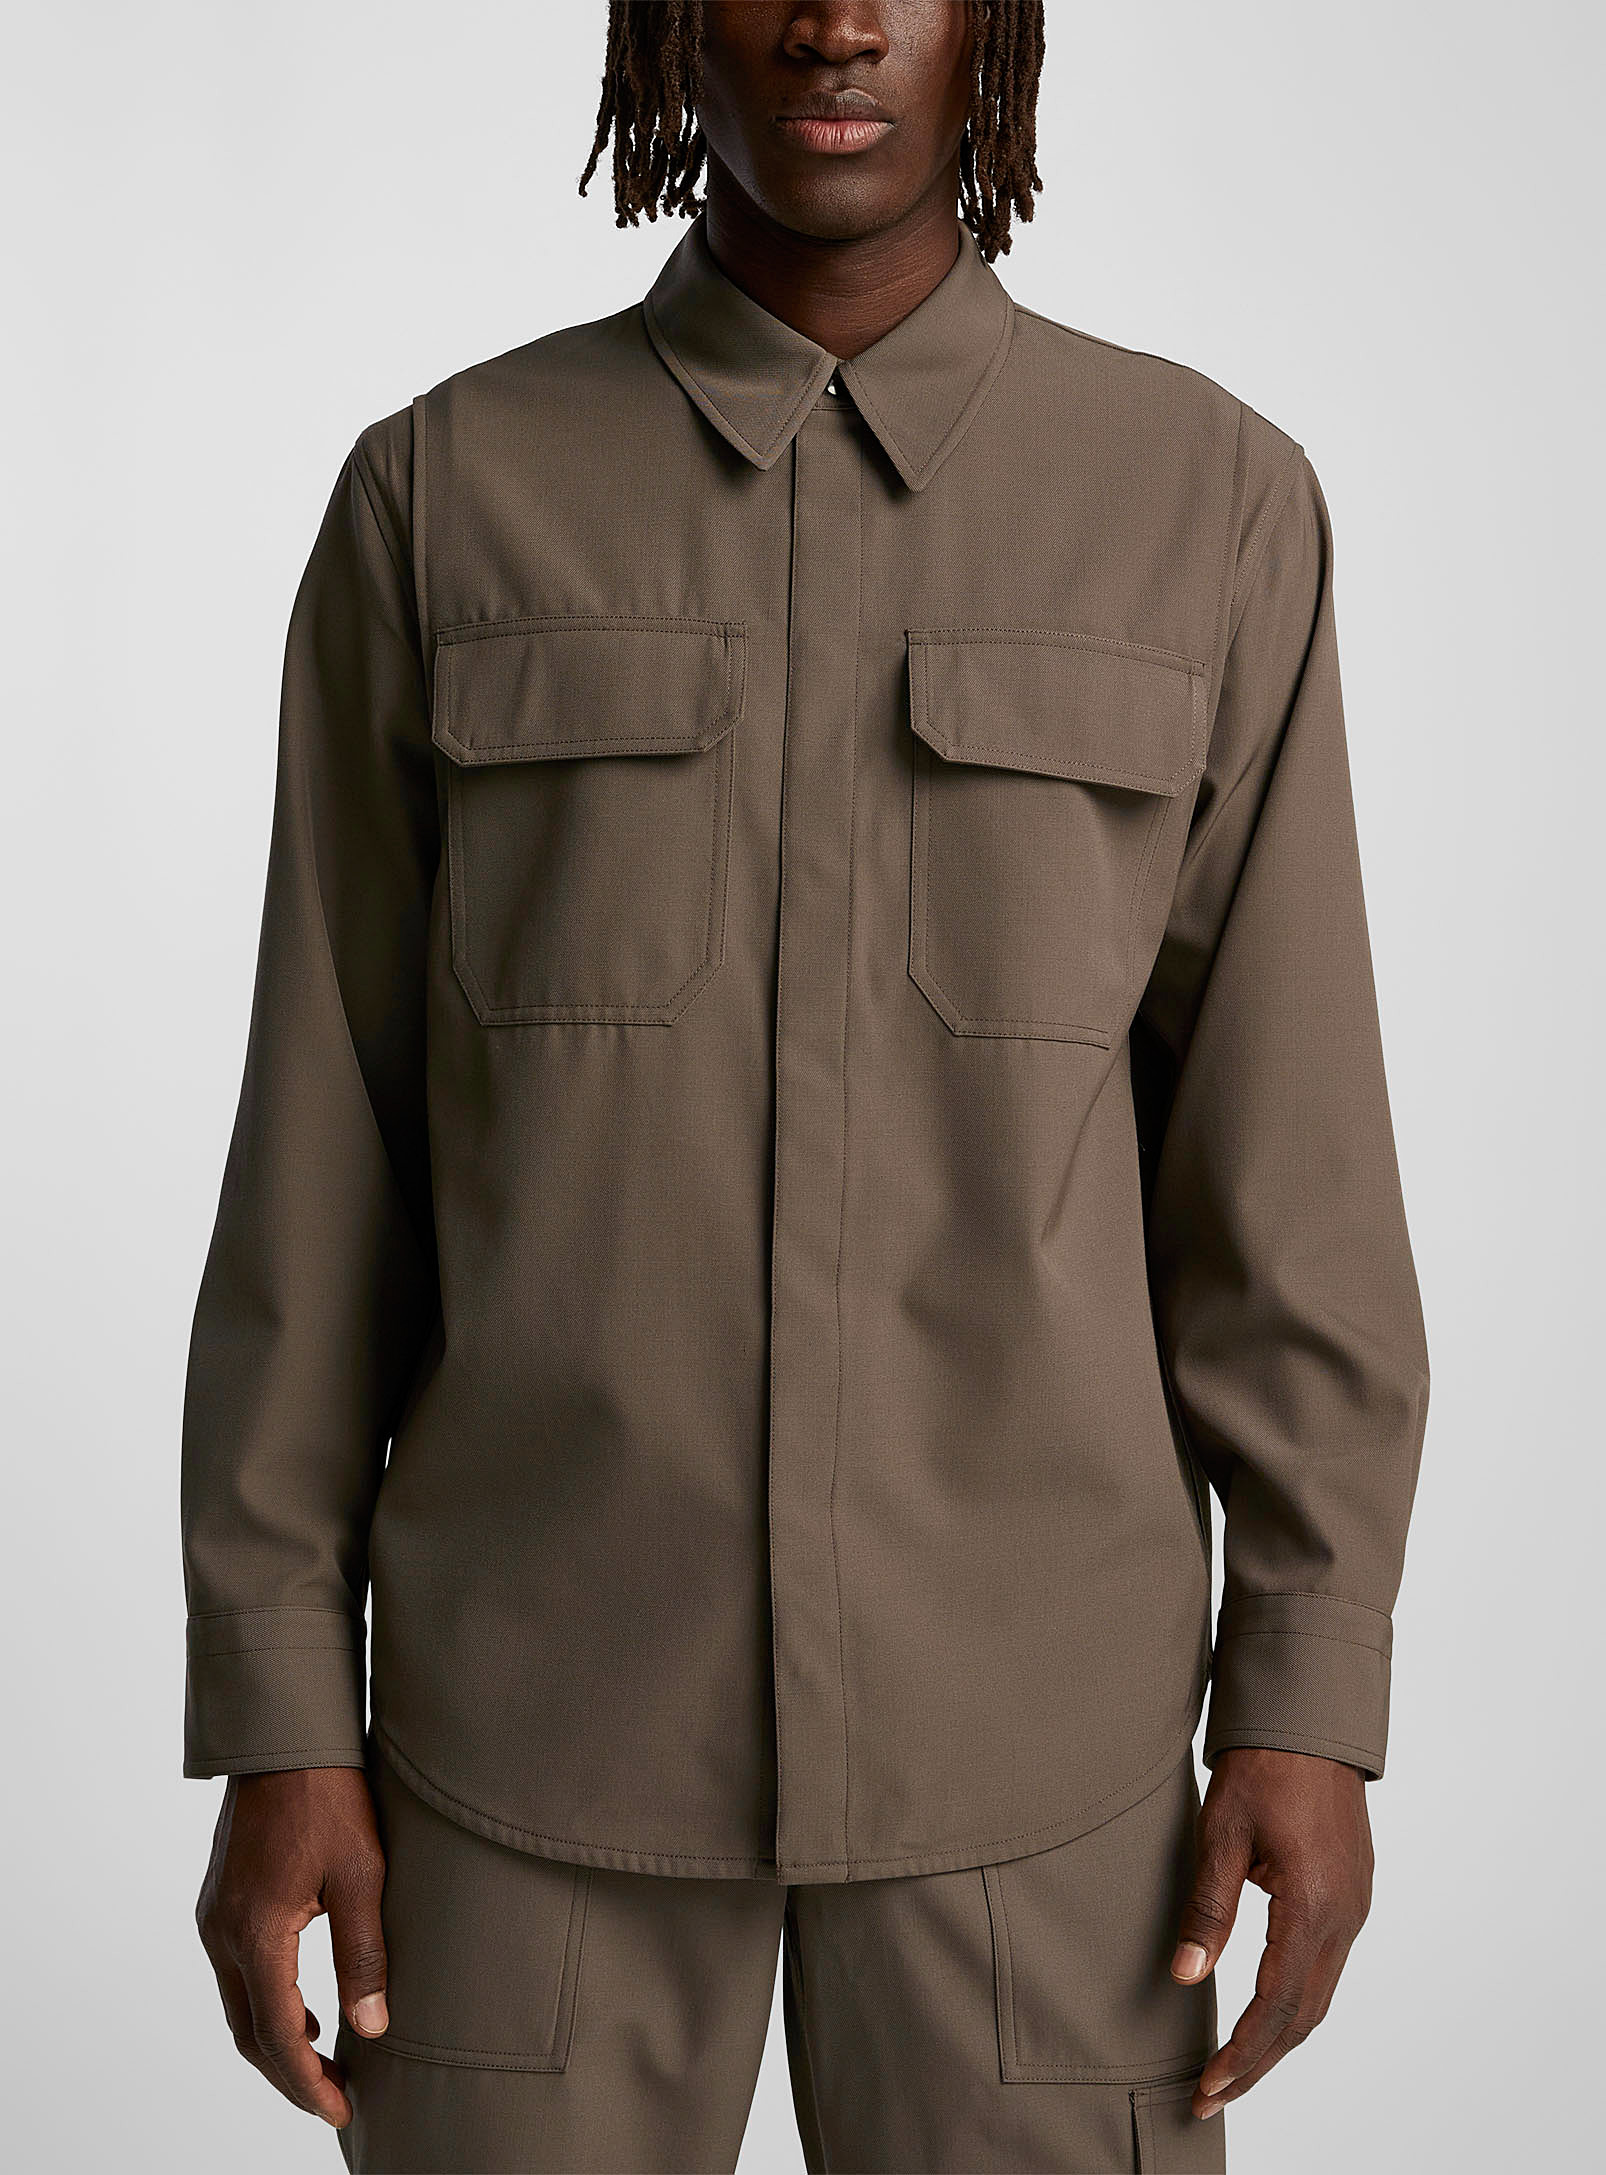 Helmut Lang Patch Pockets Military Shirt In Light Brown